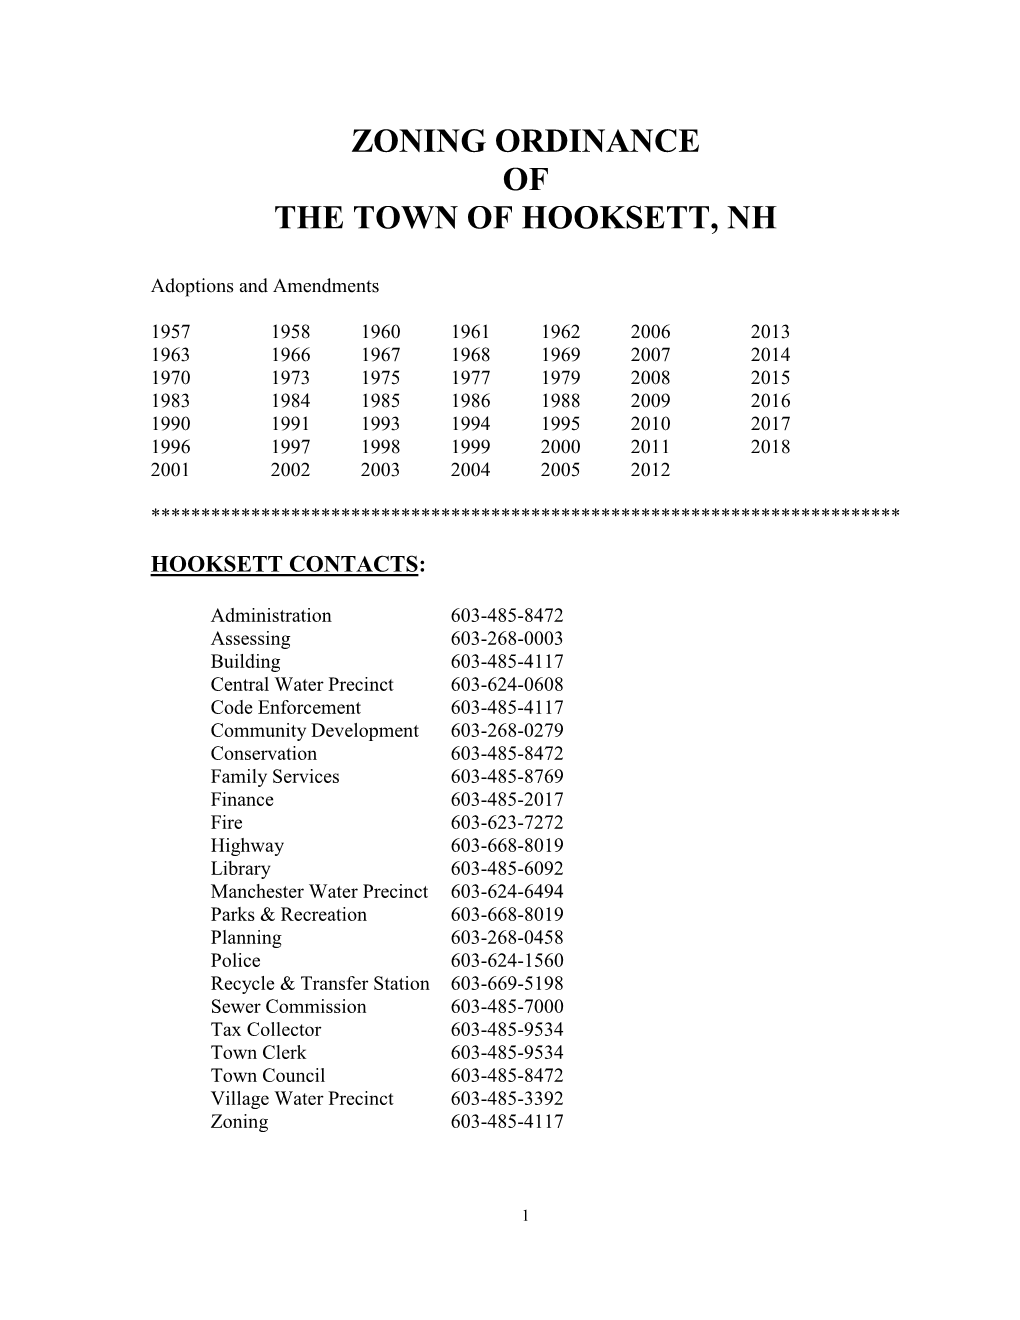 Zoning Ordinance of the Town of Hooksett, Nh